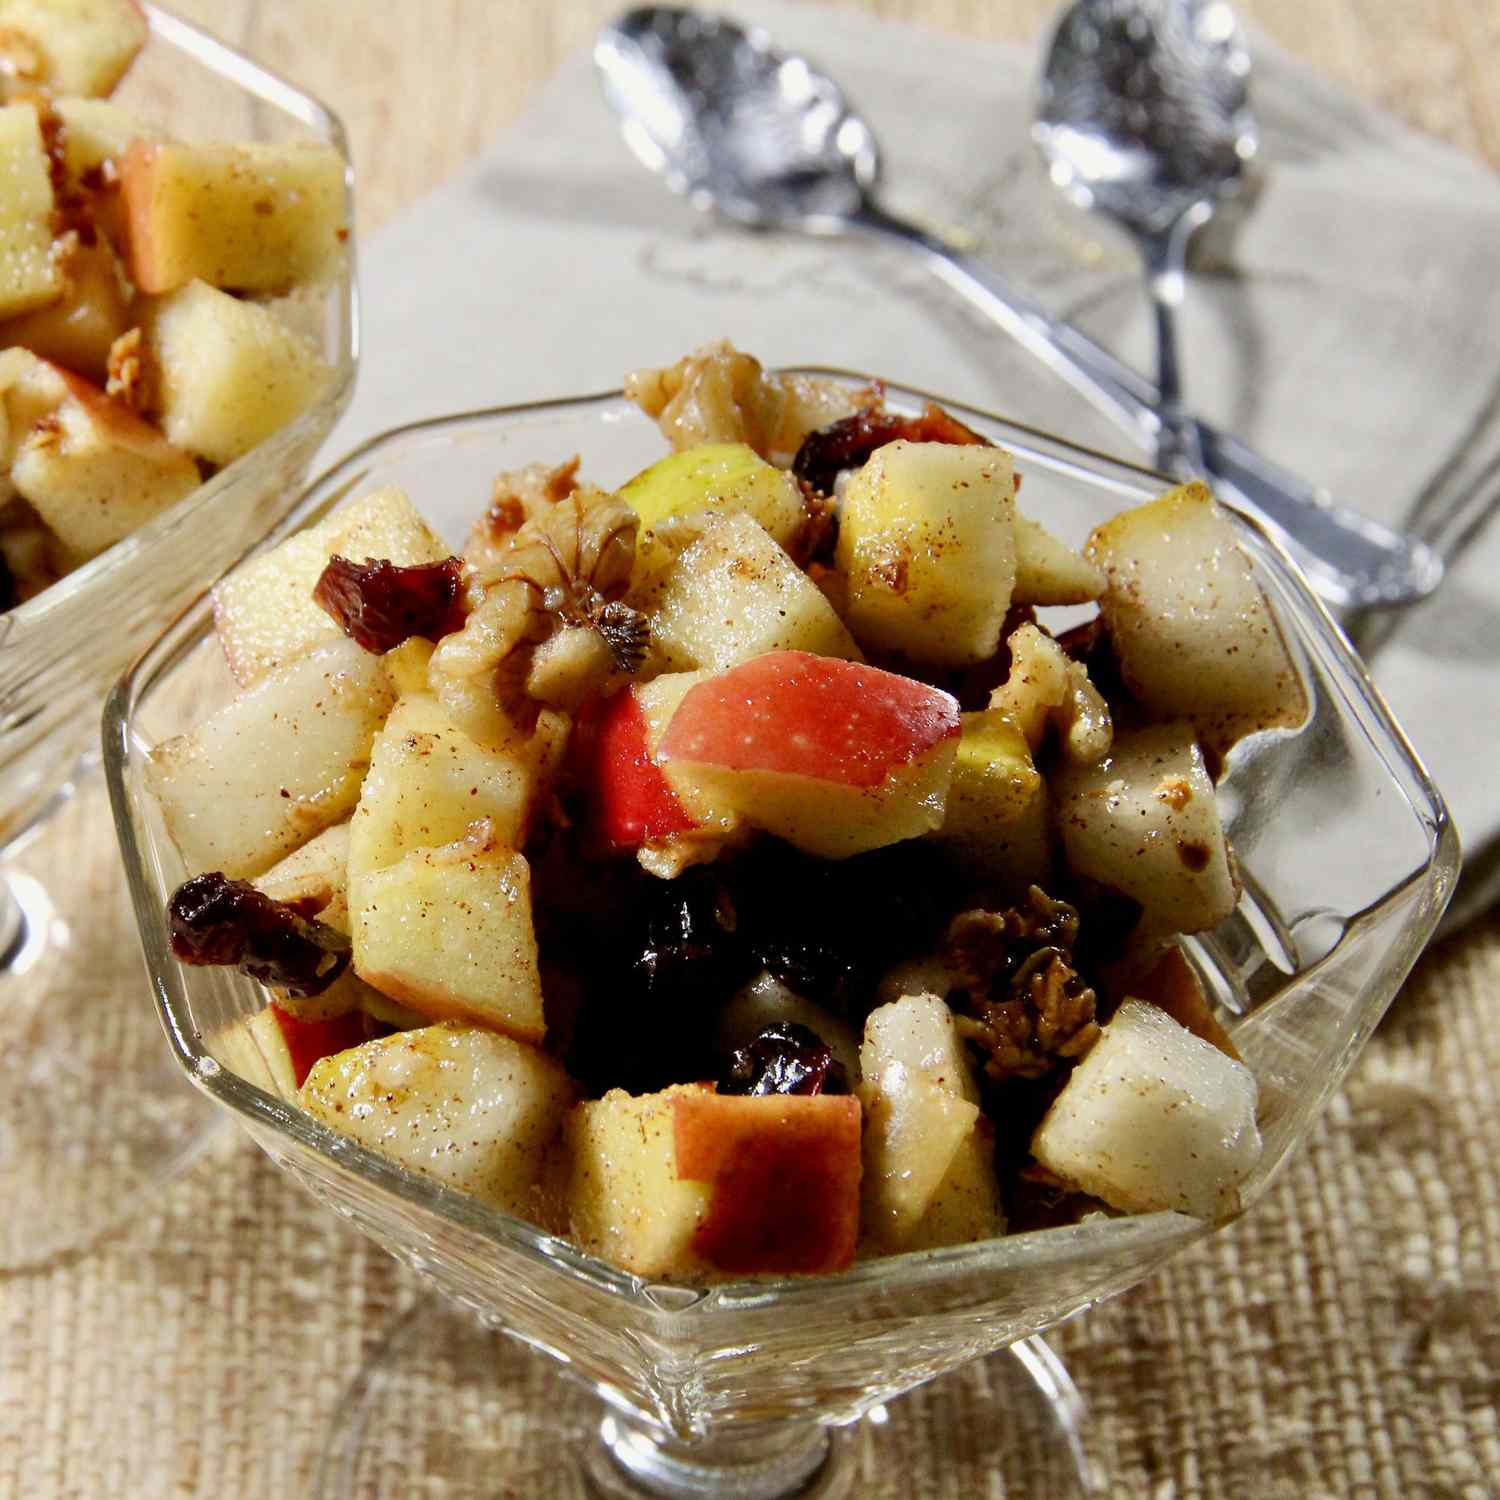 Seasonal pears and apples steal the show in this super simple fall dessert. "This is a nice fruit salad" says Allrecipes Allstar lutzflcat. "I didn't bother to peel the fruit which I think gives it better eye appeal. Do give it a little time in the fridge for flavors to meld. The granola was a nice addition!"
                          